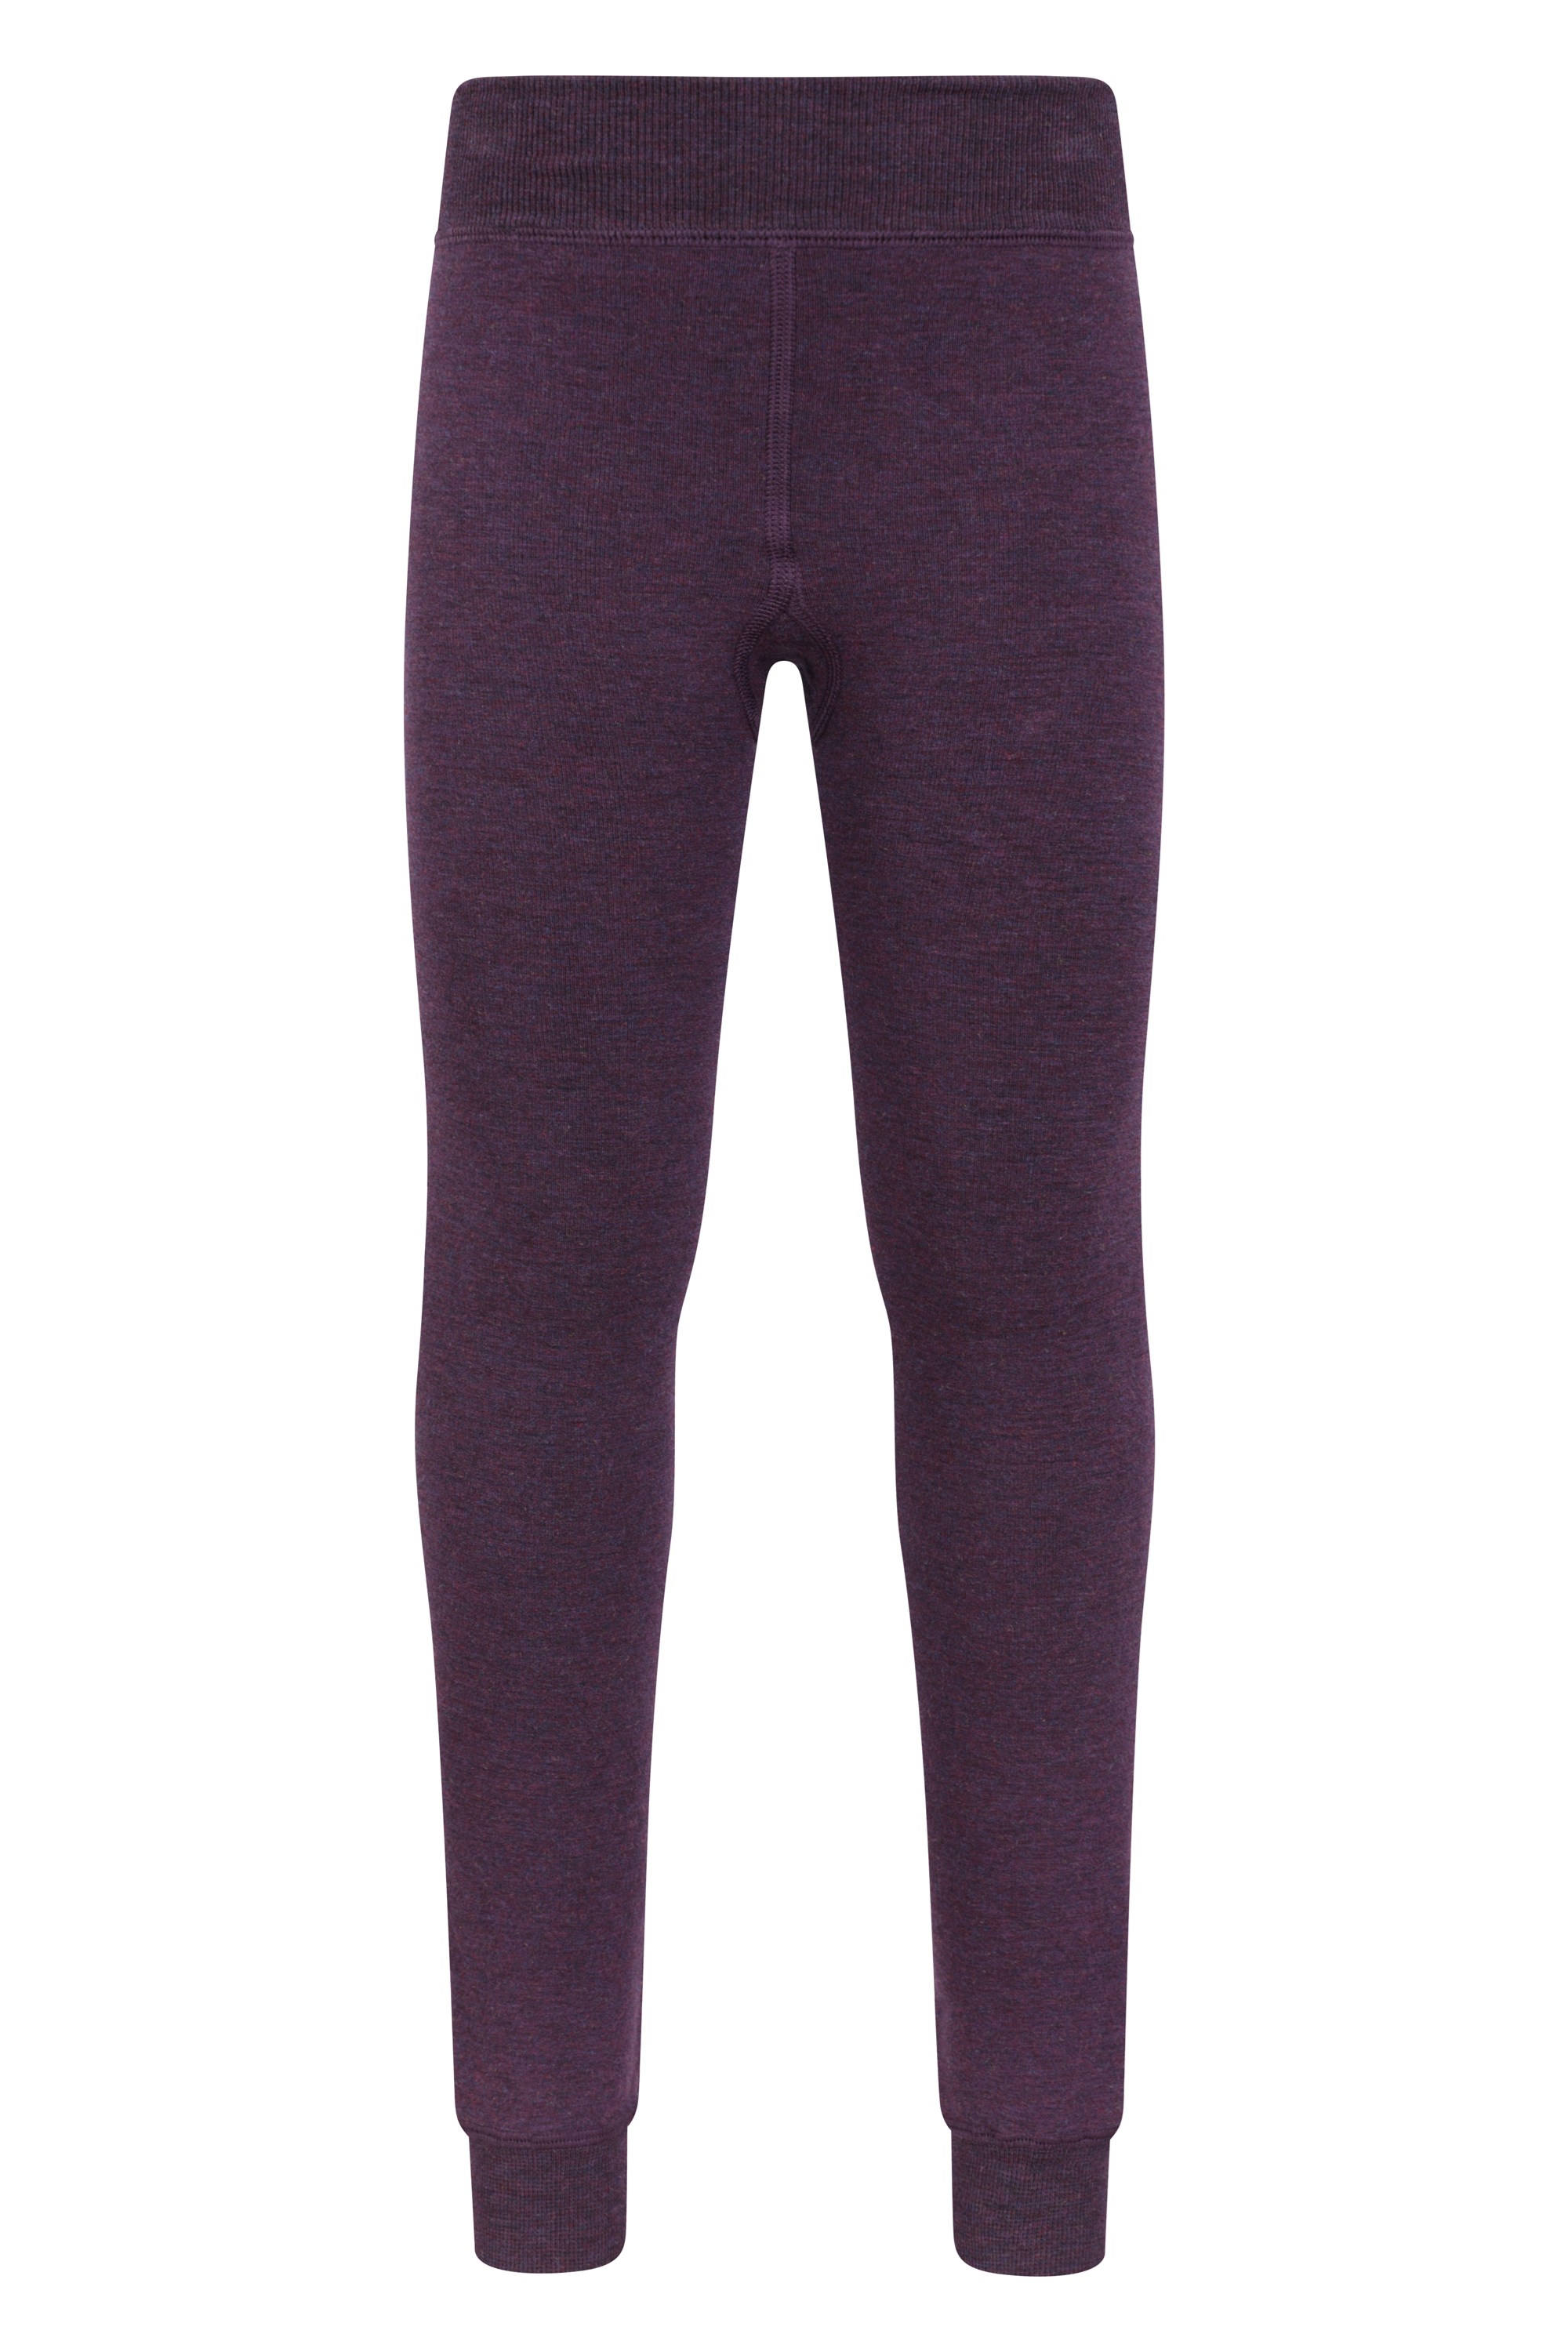 Childrens Fleece Lined Leggings Uk  International Society of Precision  Agriculture